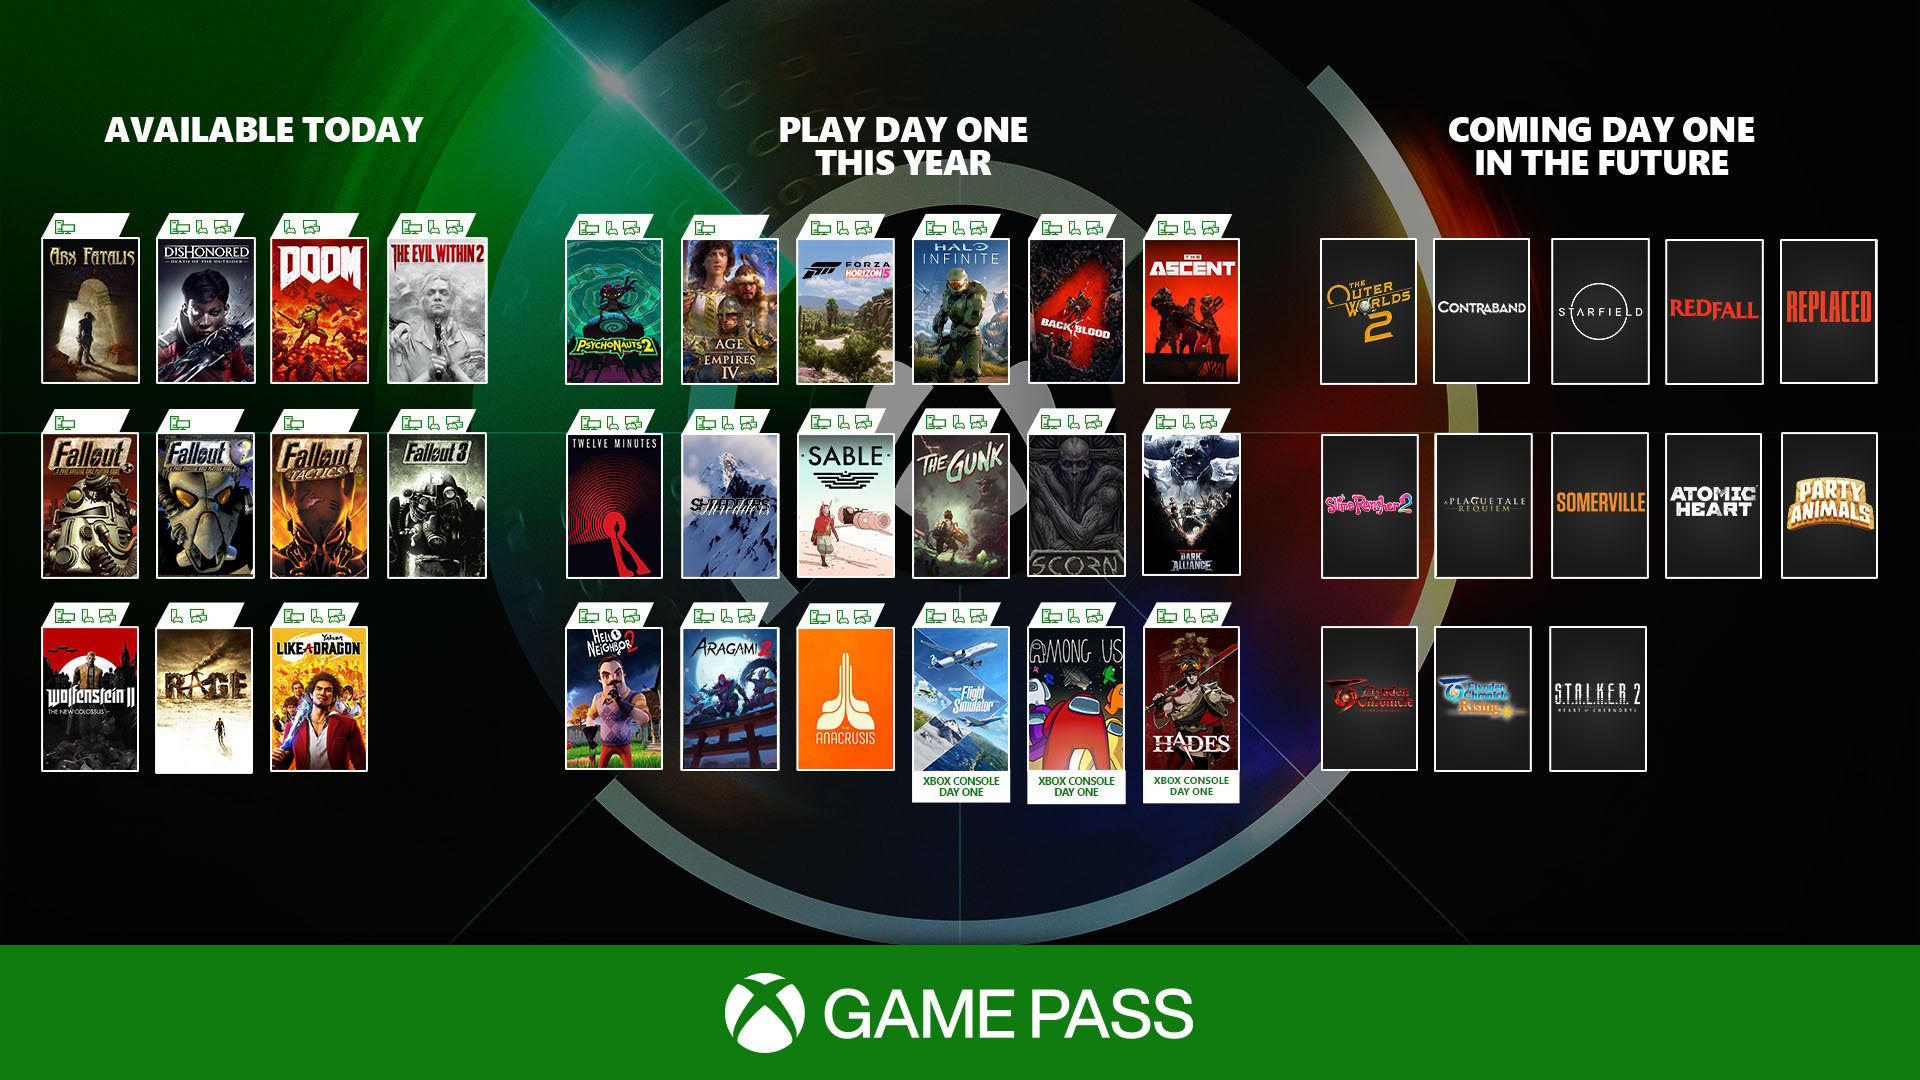 xbox game pass games coming soon www.nac.org.zw